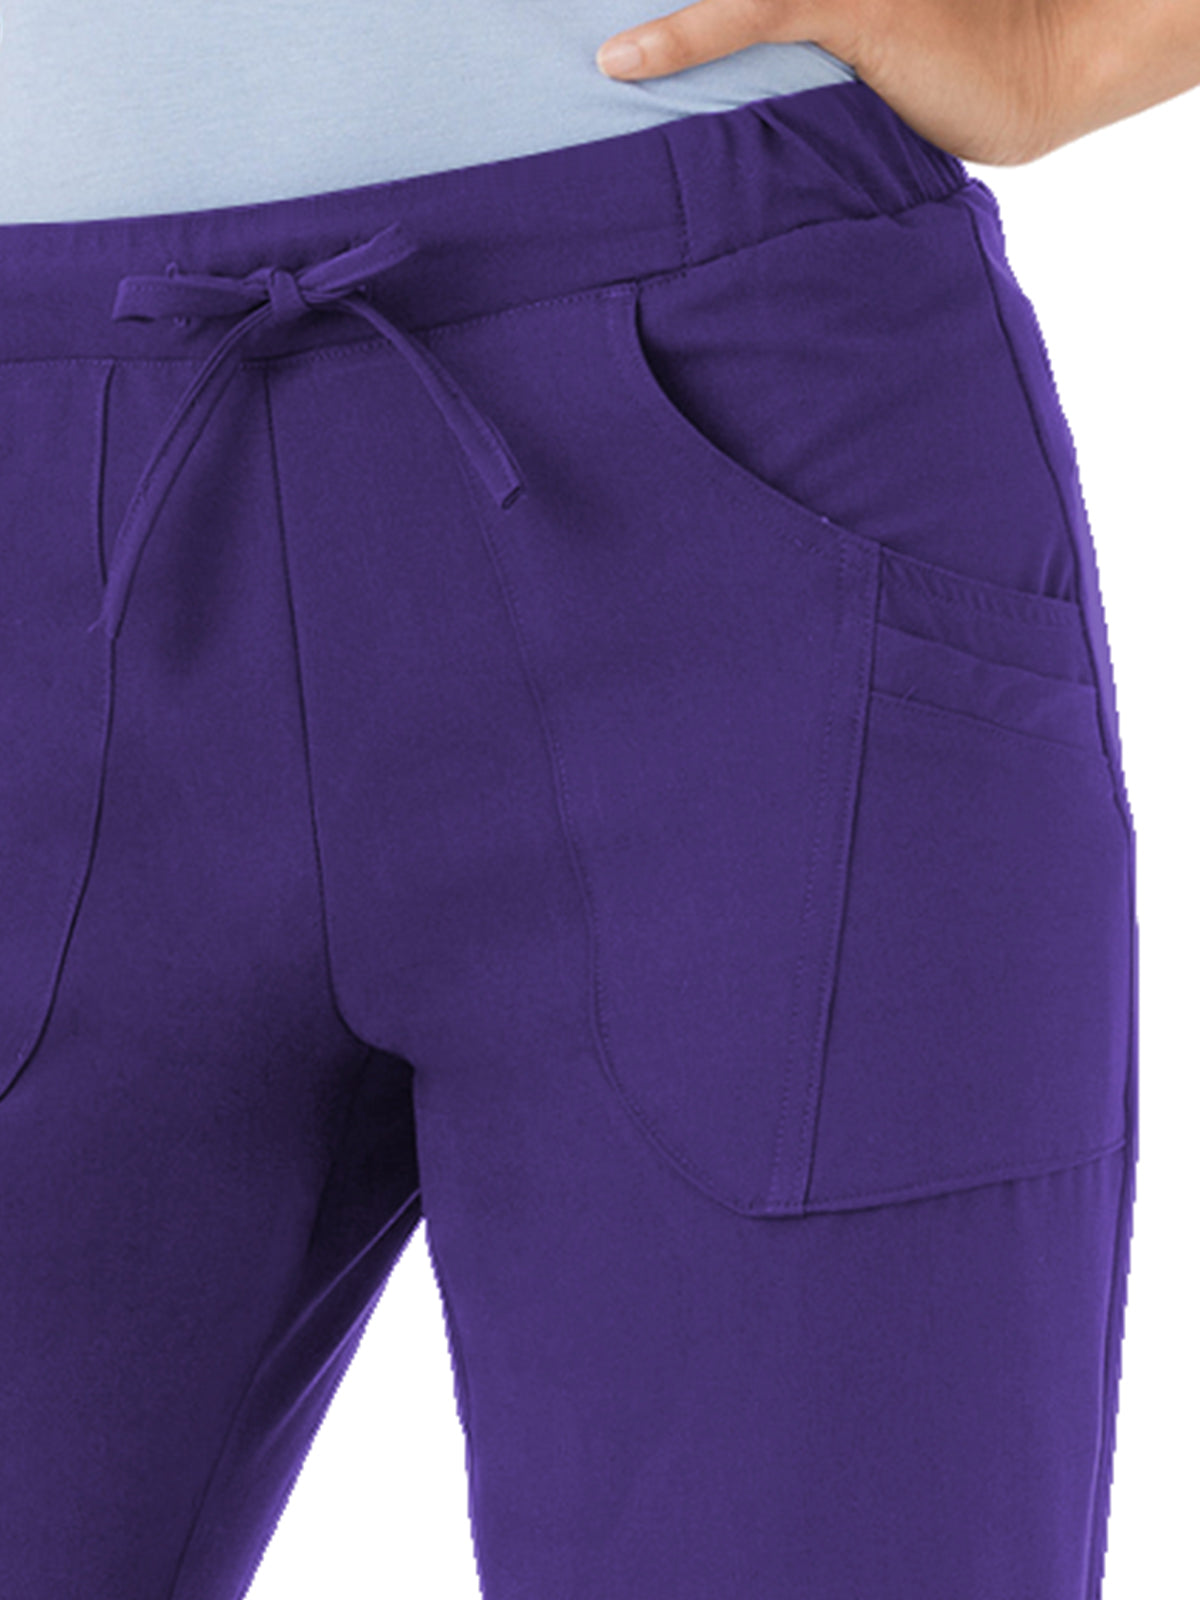 Women's Extreme Comfy Pant